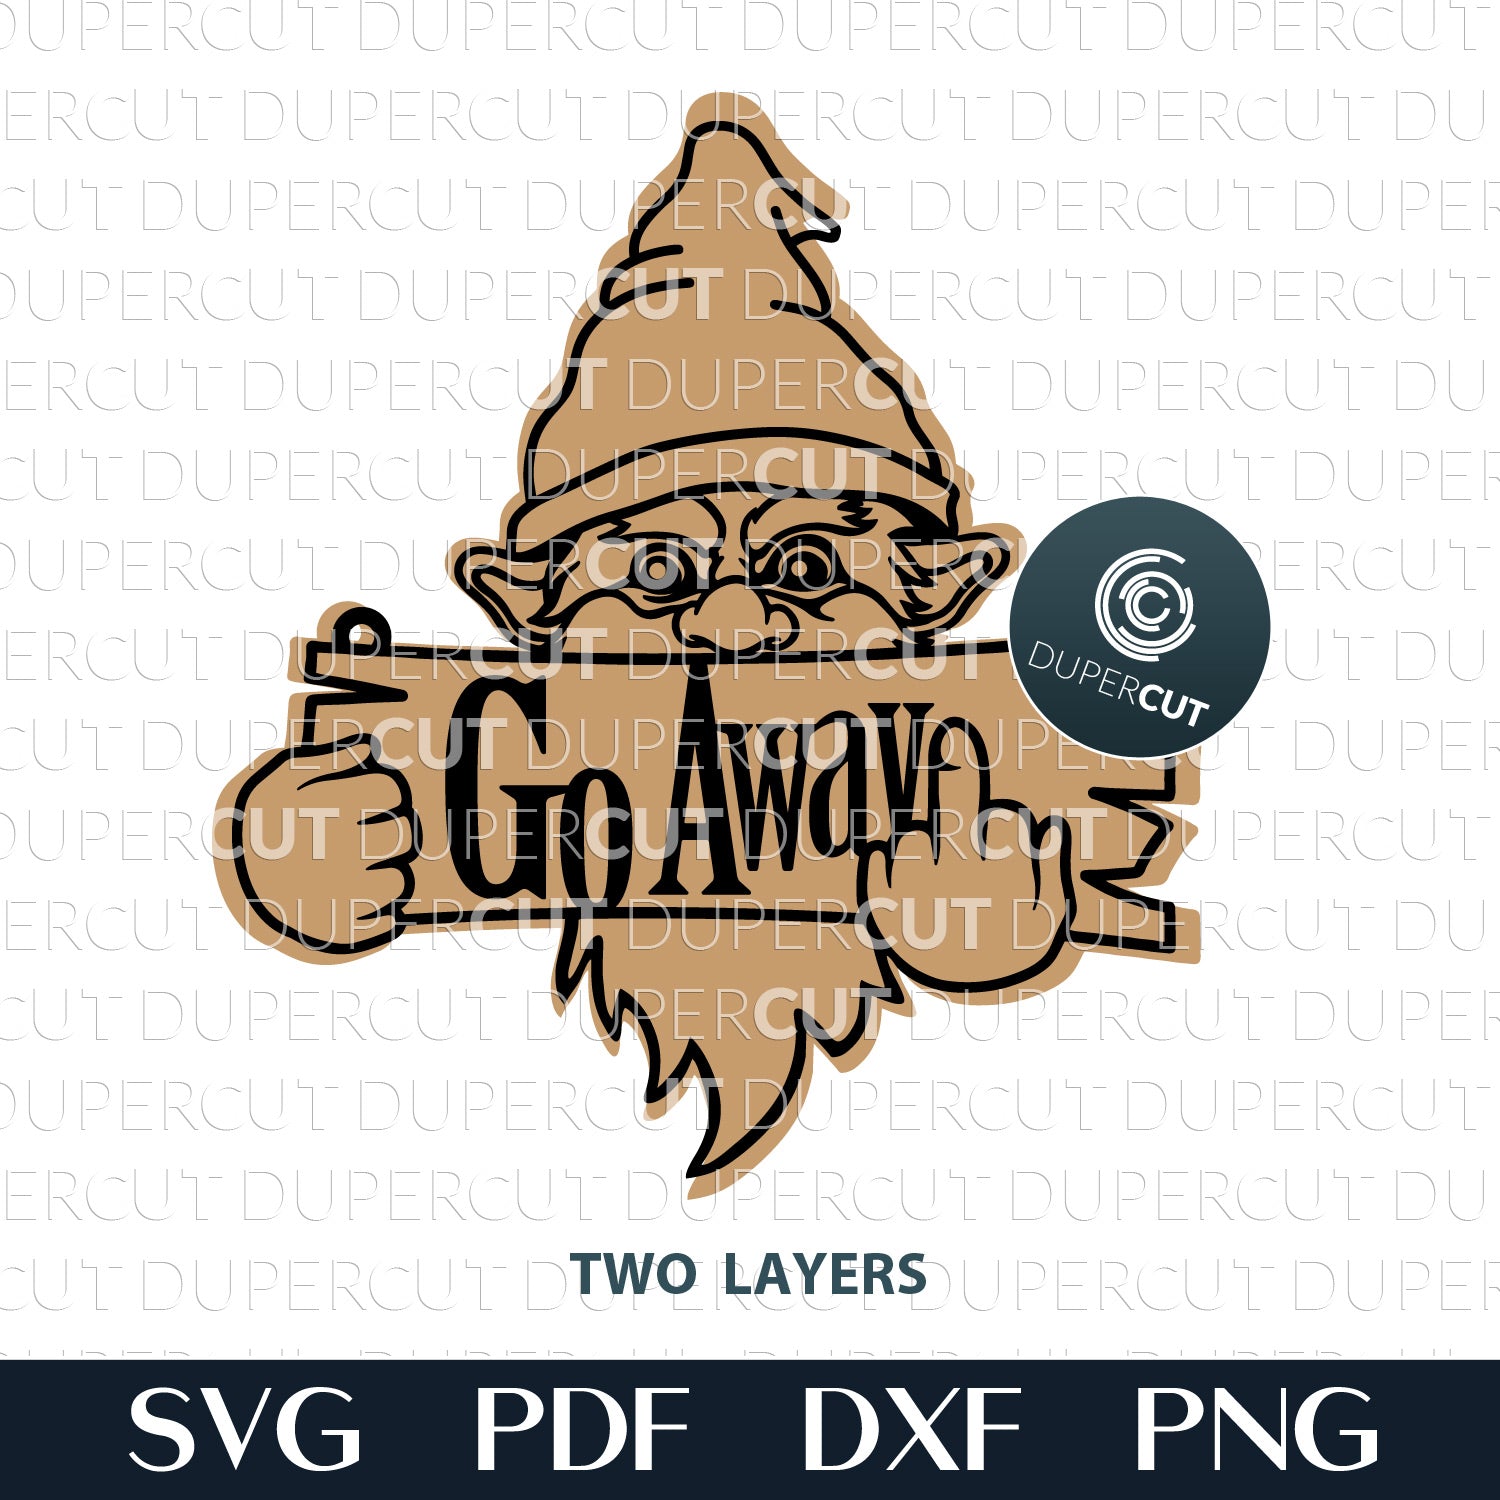 Naughty gnome giving a finger "Go Away" sign door hanger, SVG DXF layered laser cutting files for Glowforge, Cricut, Xtool, CNC plasma machines, scroll saw pattern by www.DuperCut.com